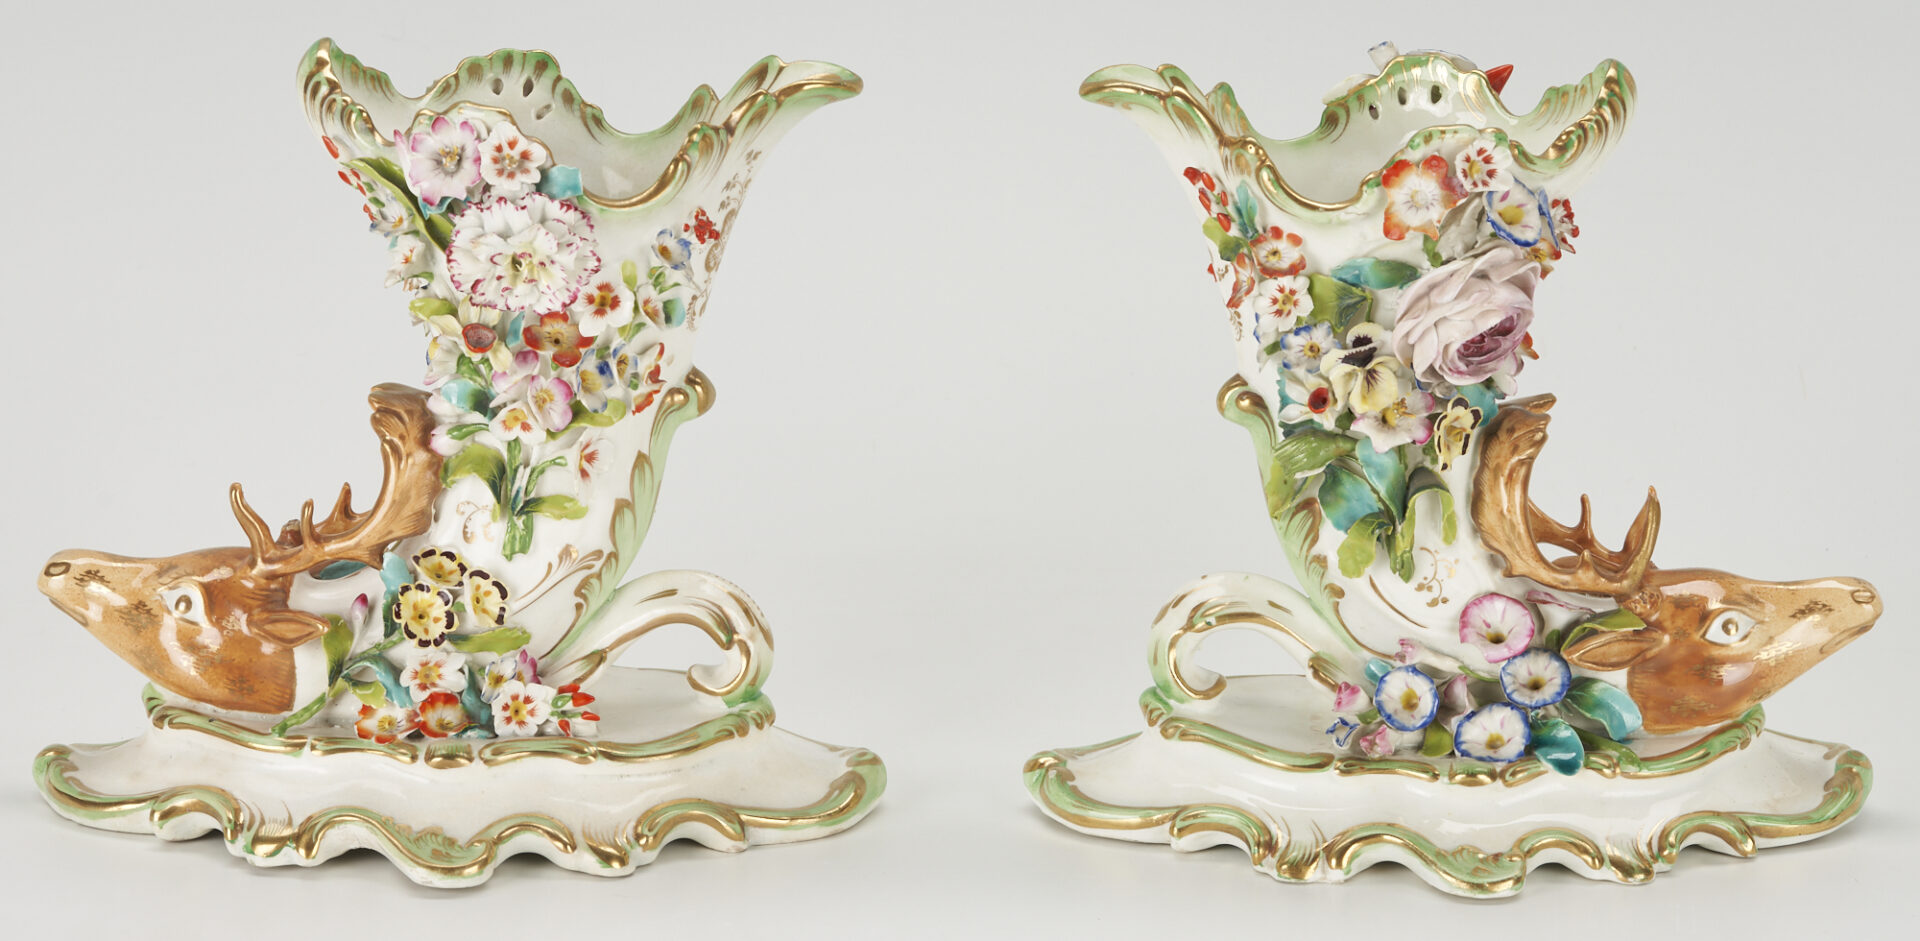 Lot 865: 10 Pcs of English Porcelain Incl. Spode Bone China Fish Plates & 2 Floral Encrusted Stag Cups